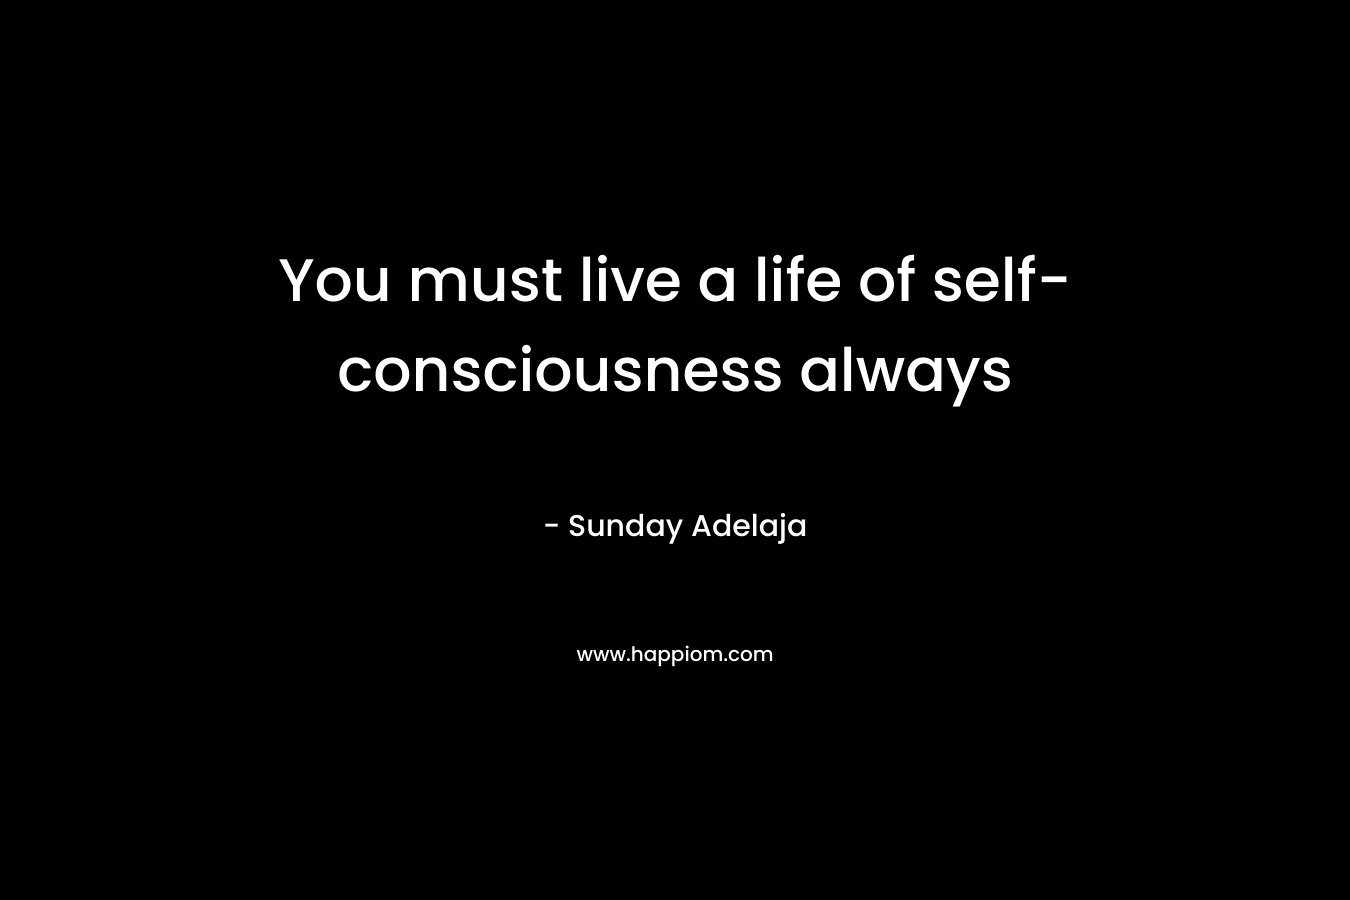 You must live a life of self-consciousness always